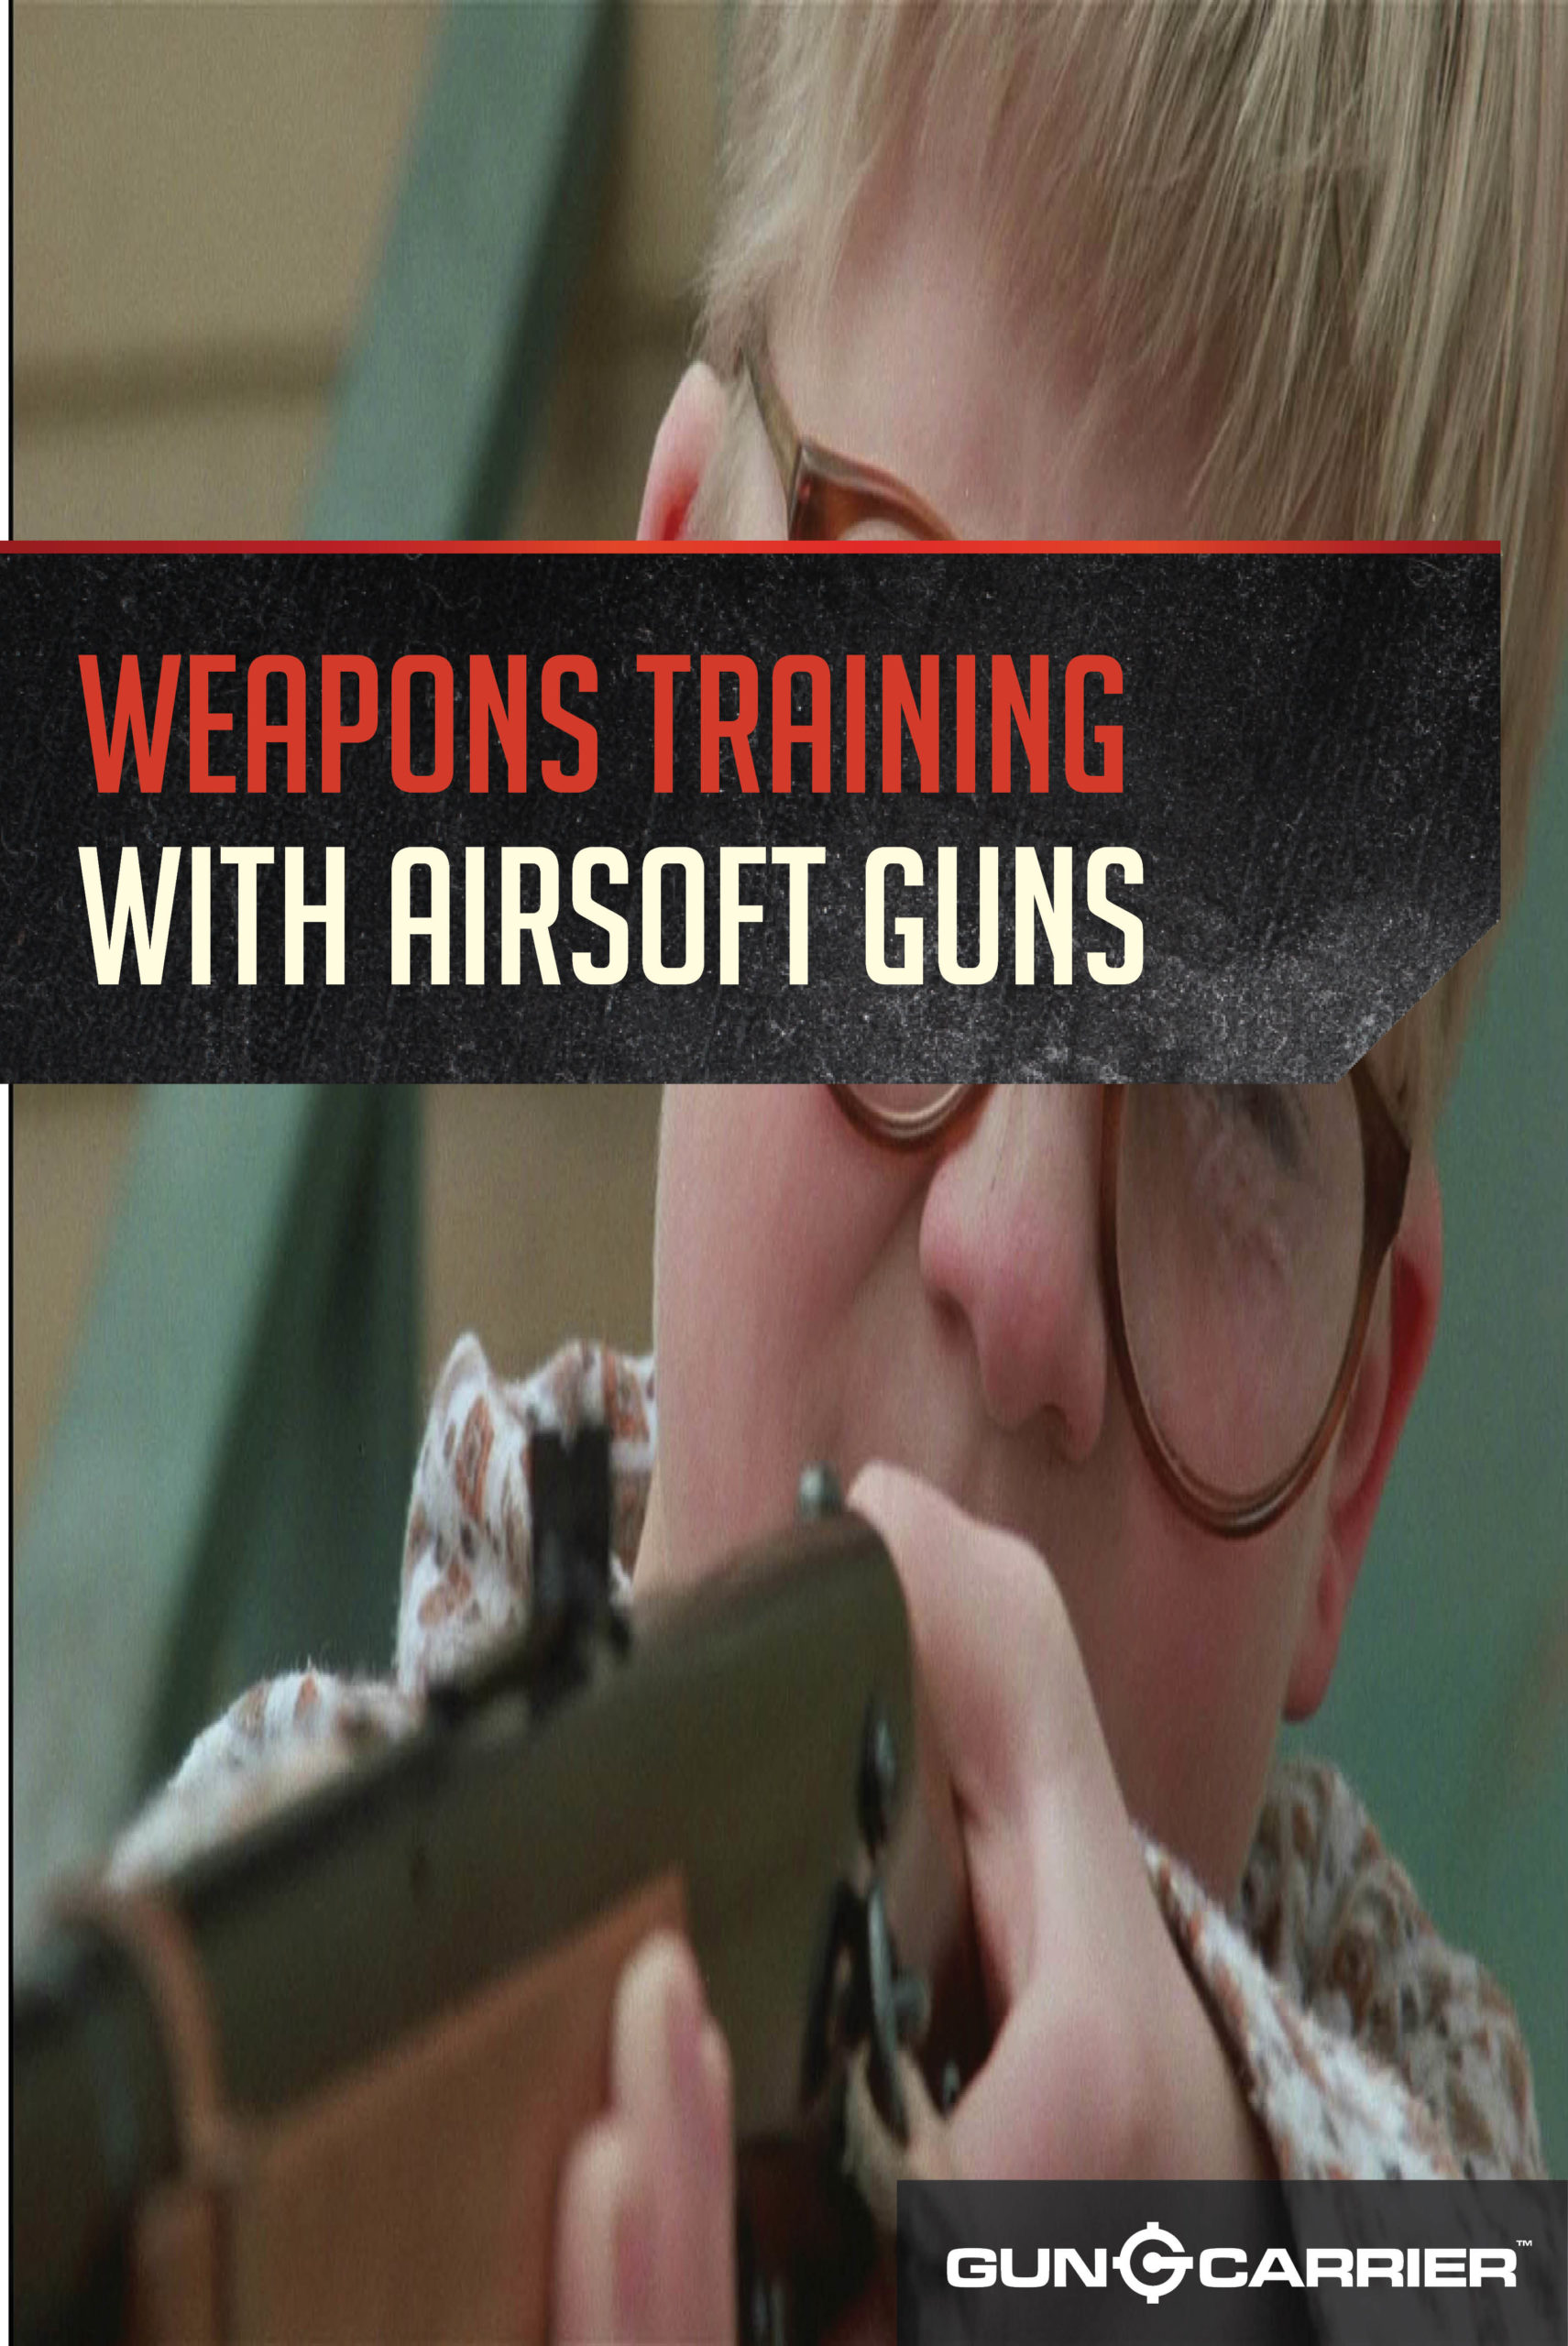 Defensive Weapon Training: The Airsoft Alternative Part I by Gun Carrier at https://guncarriernews.wpengine.com/airsoft-alternative-part-1